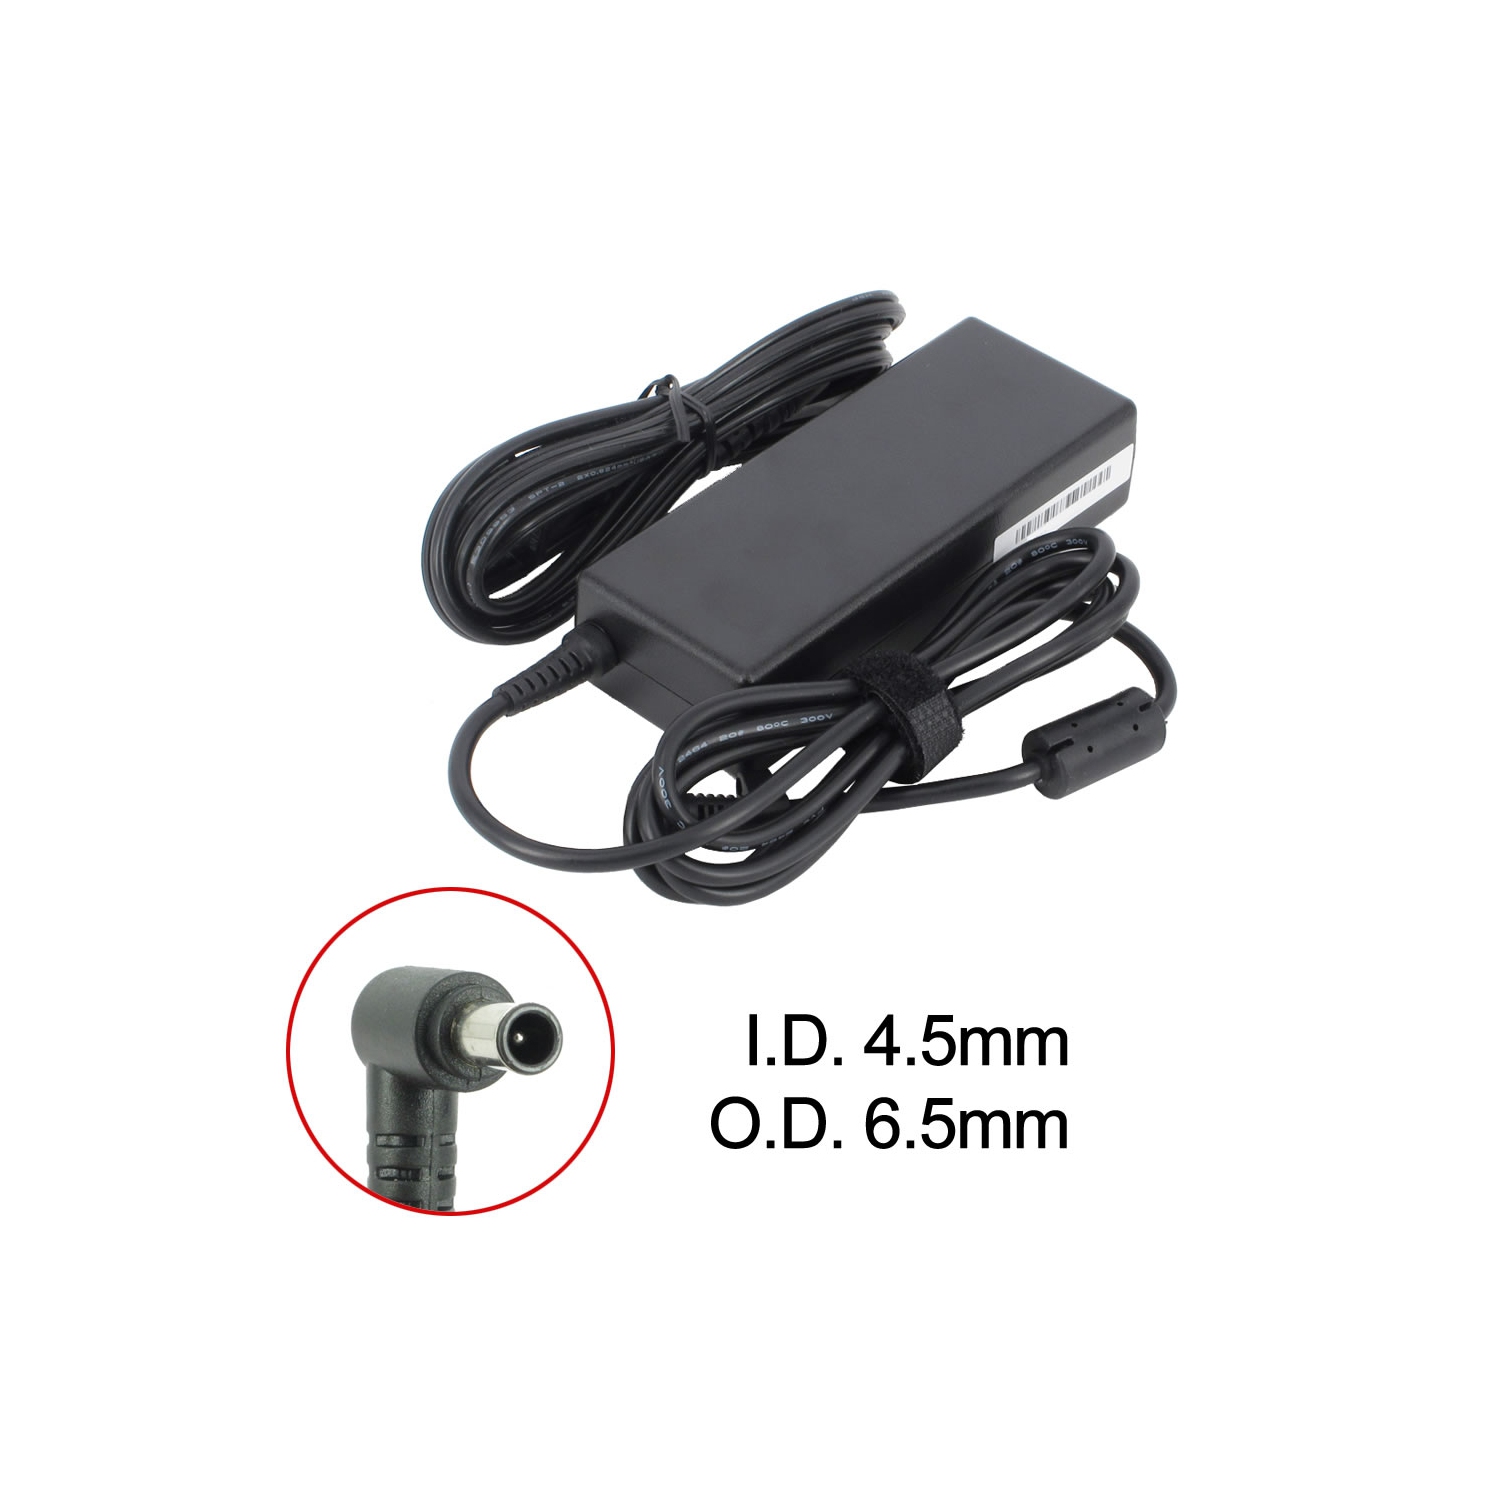 Brand New Laptop AC Adapter for Sony VAIO VGN-CR4000, PCGA-AC19V10, PCGA-AC19V3, VGP-AC19V20, VGP-AC19V30, VGP-AC19V51